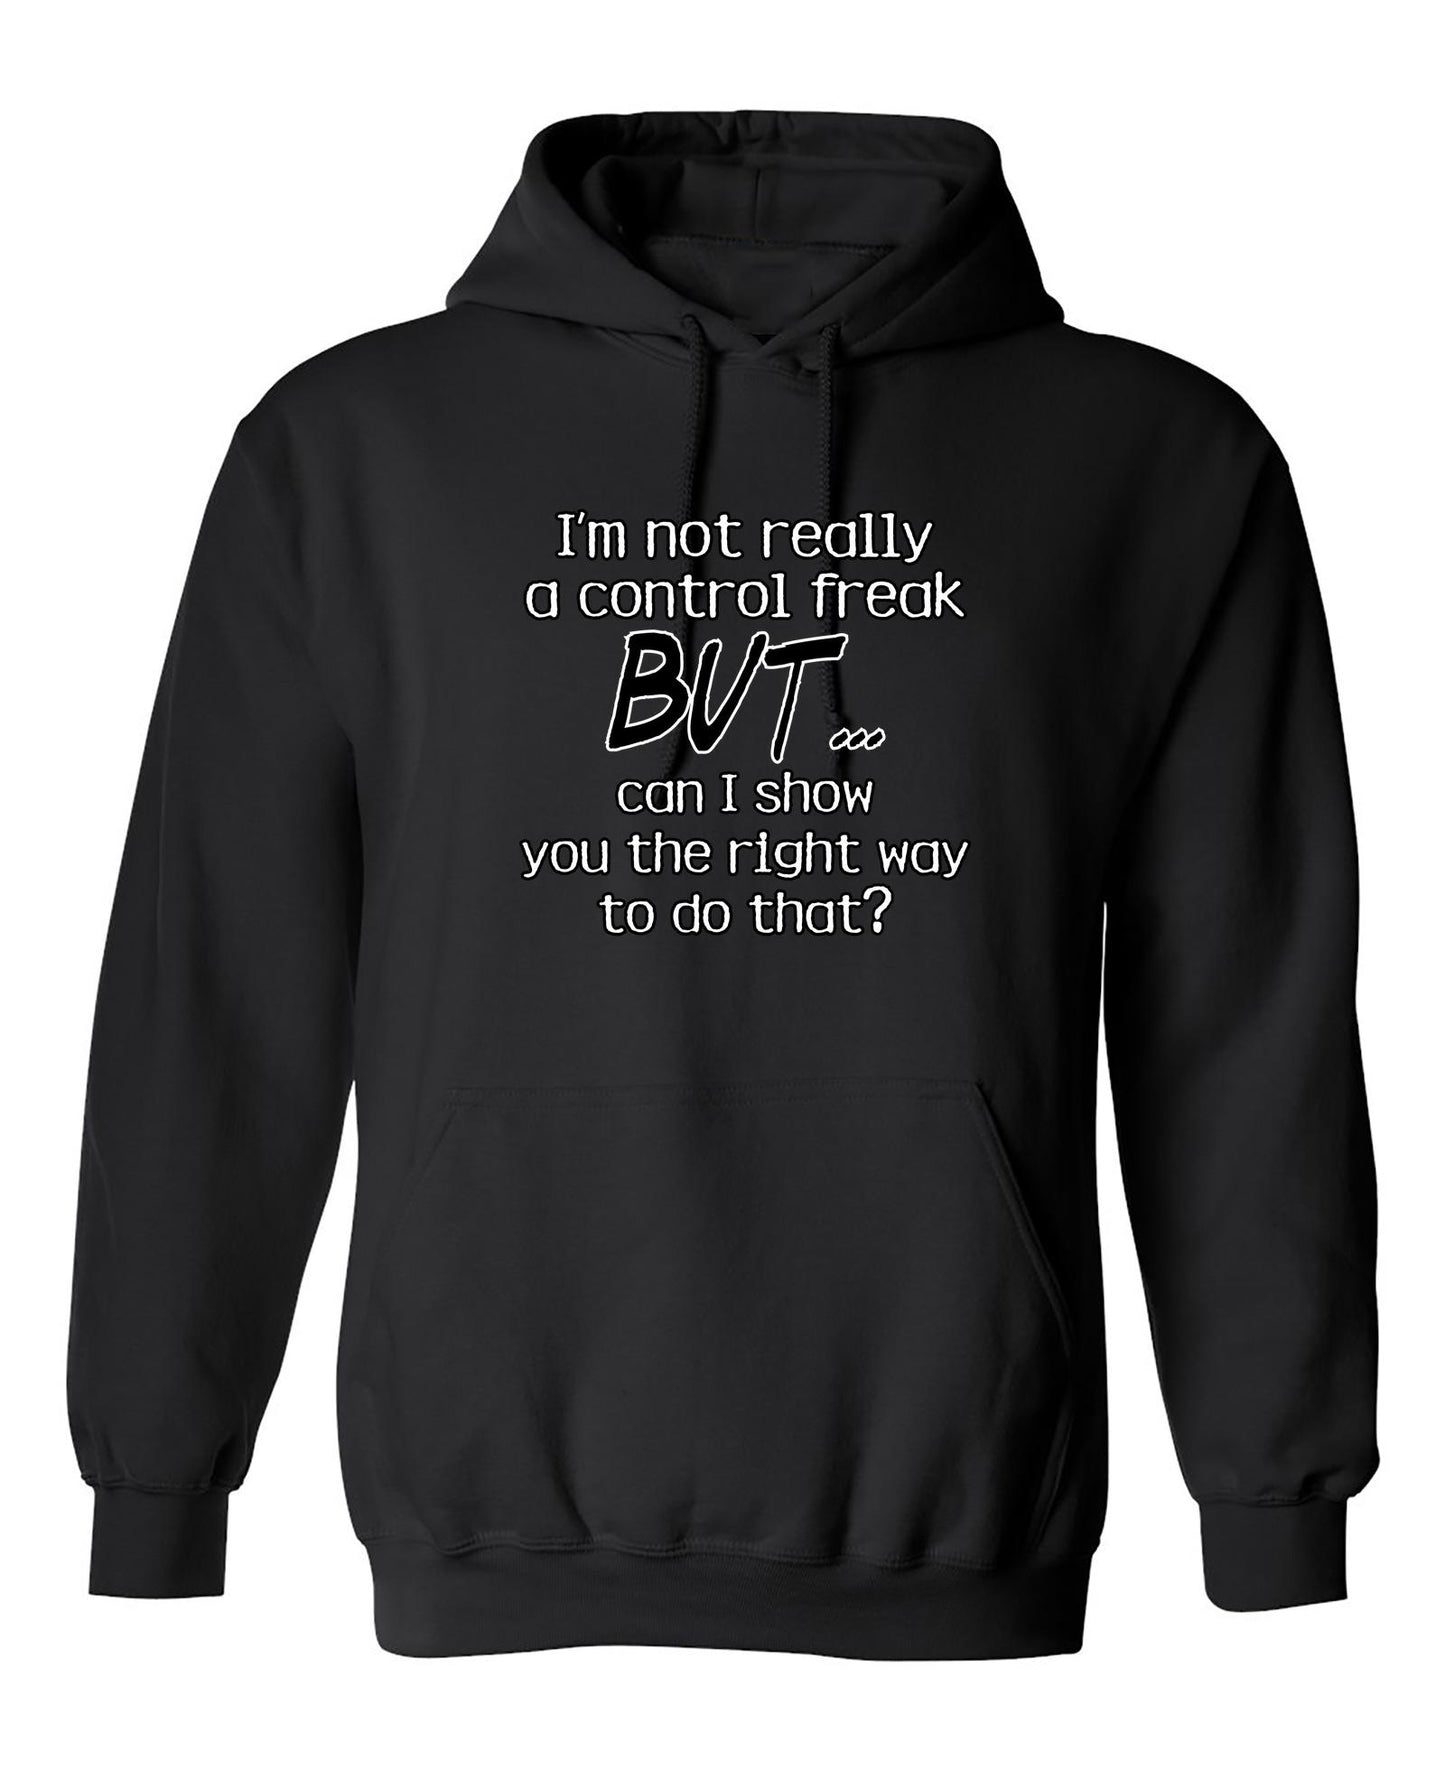 Funny T-Shirts design "I'm Not Really A Control Freak But I Can Show You The Right Way To Do That"